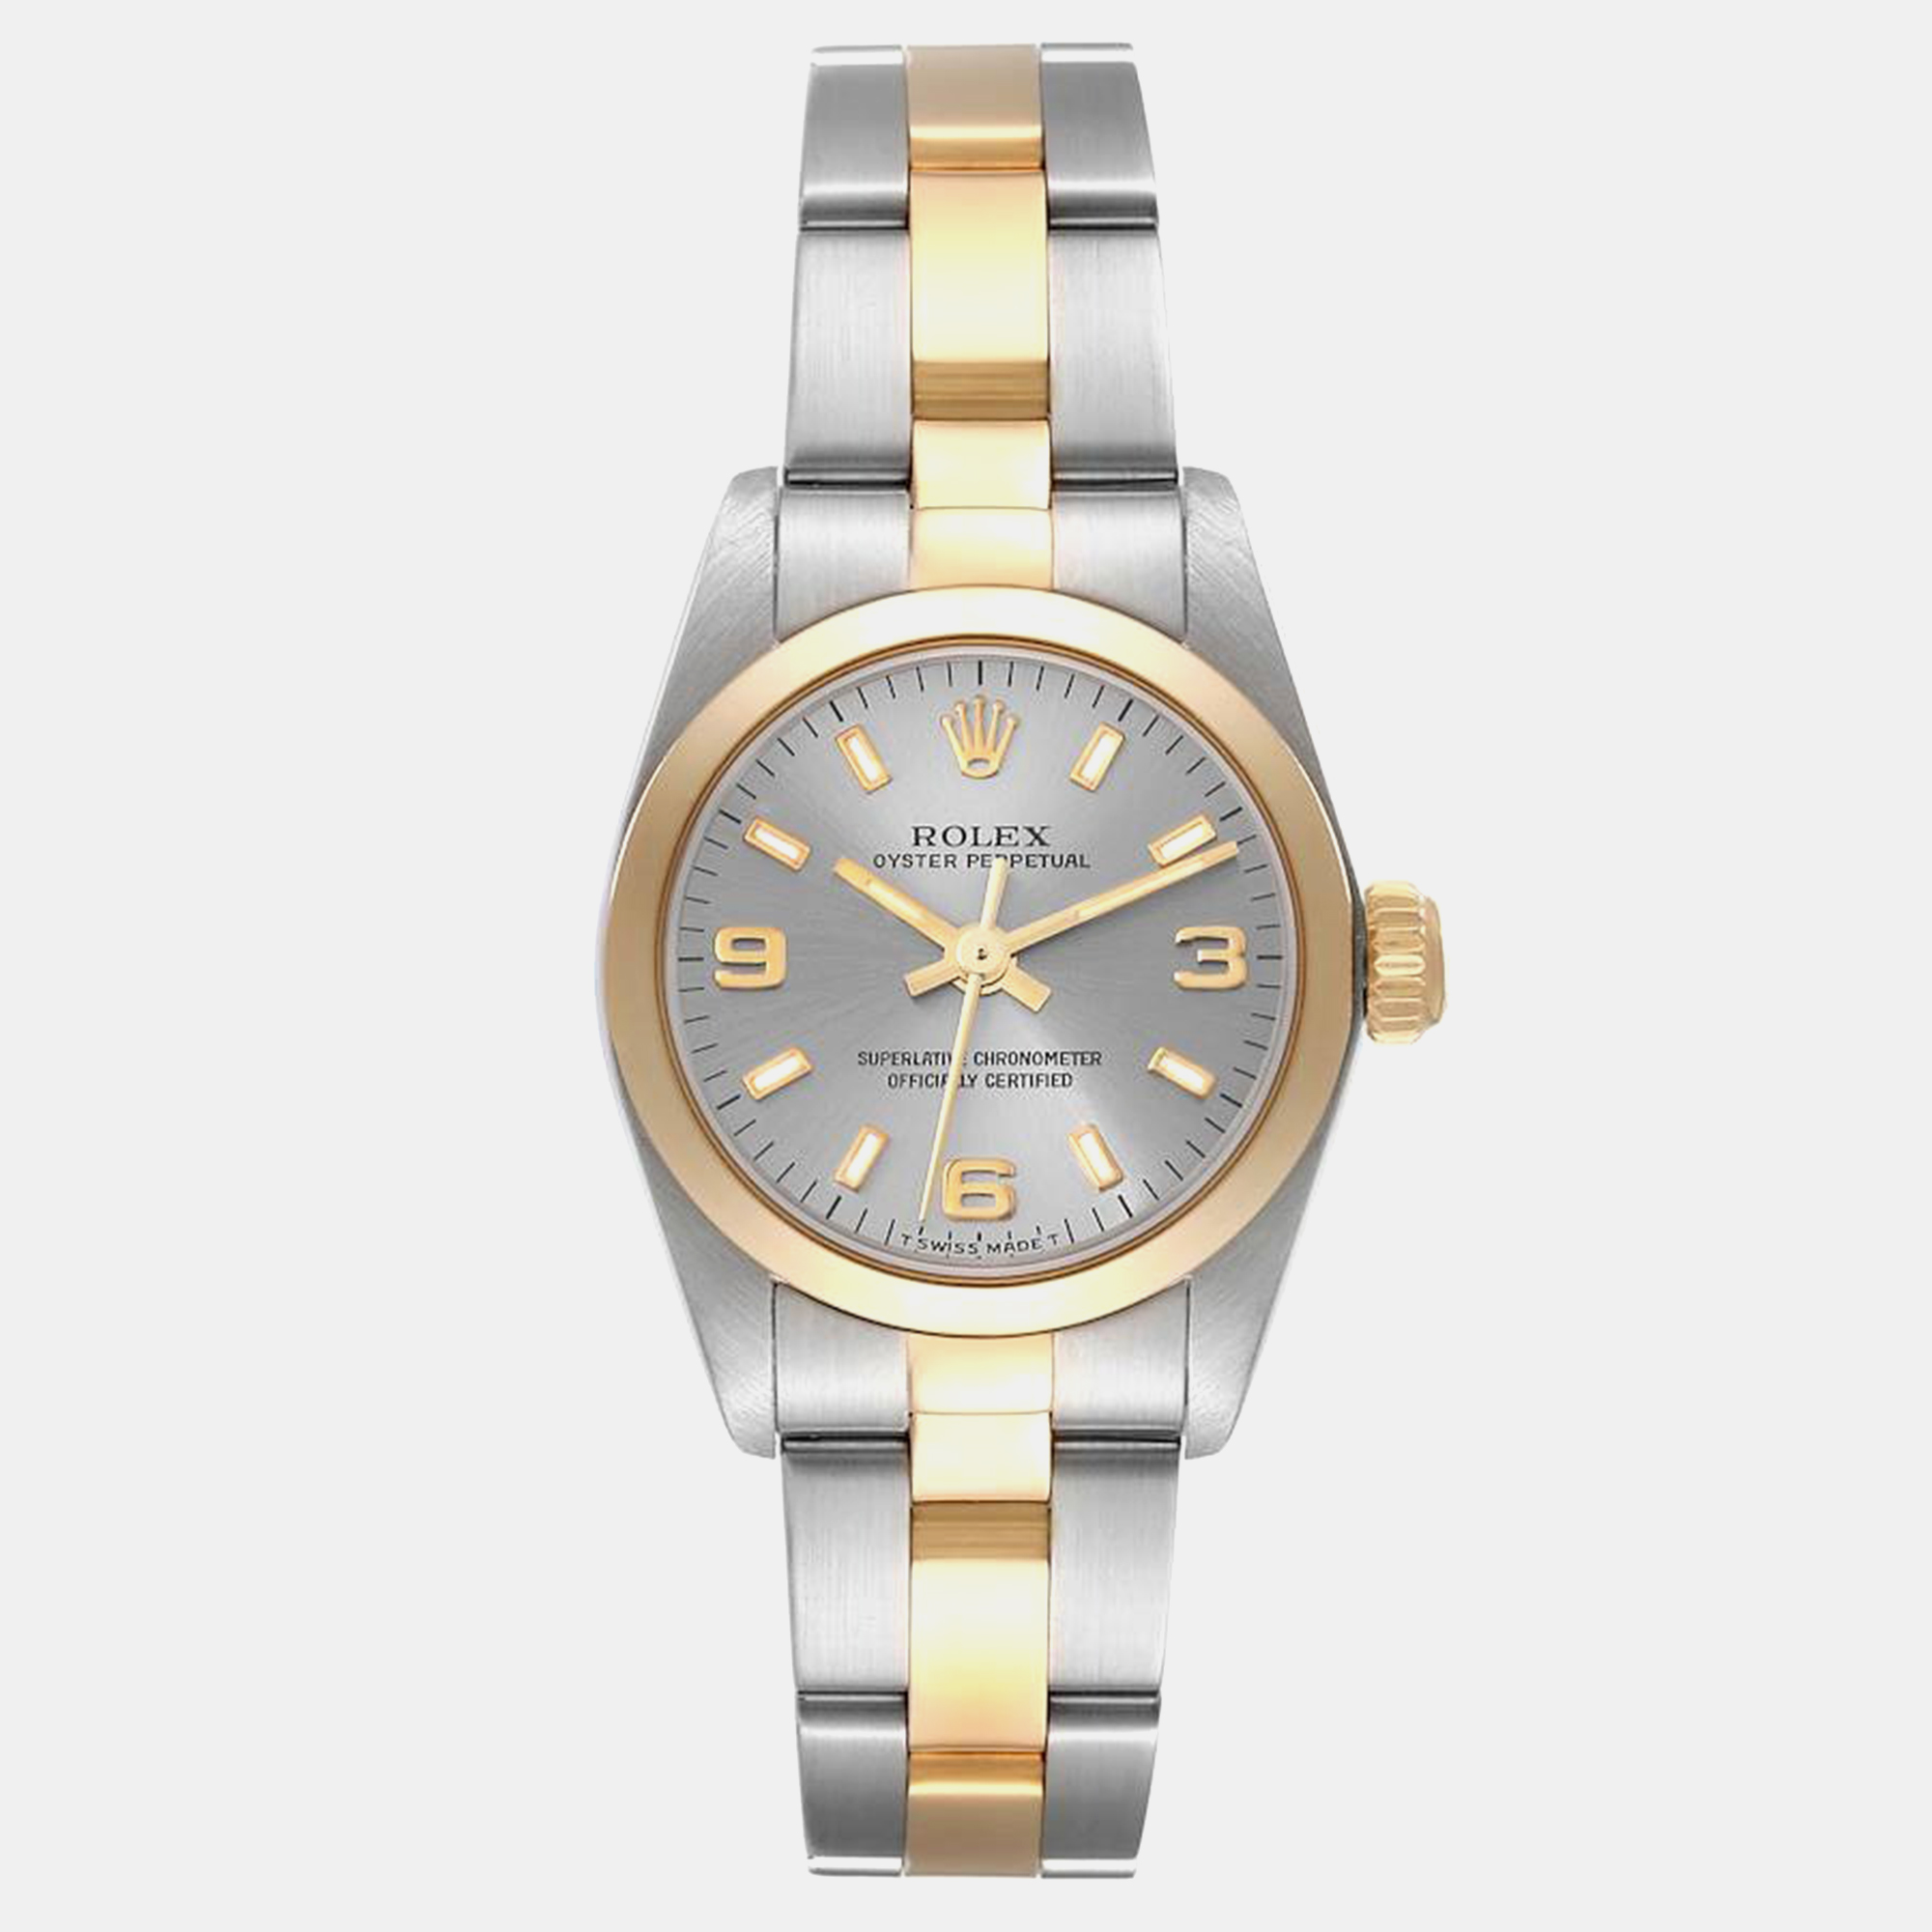 Rolex oyster perpetual steel yellow gold slate dial ladies watch 67183 24 mm